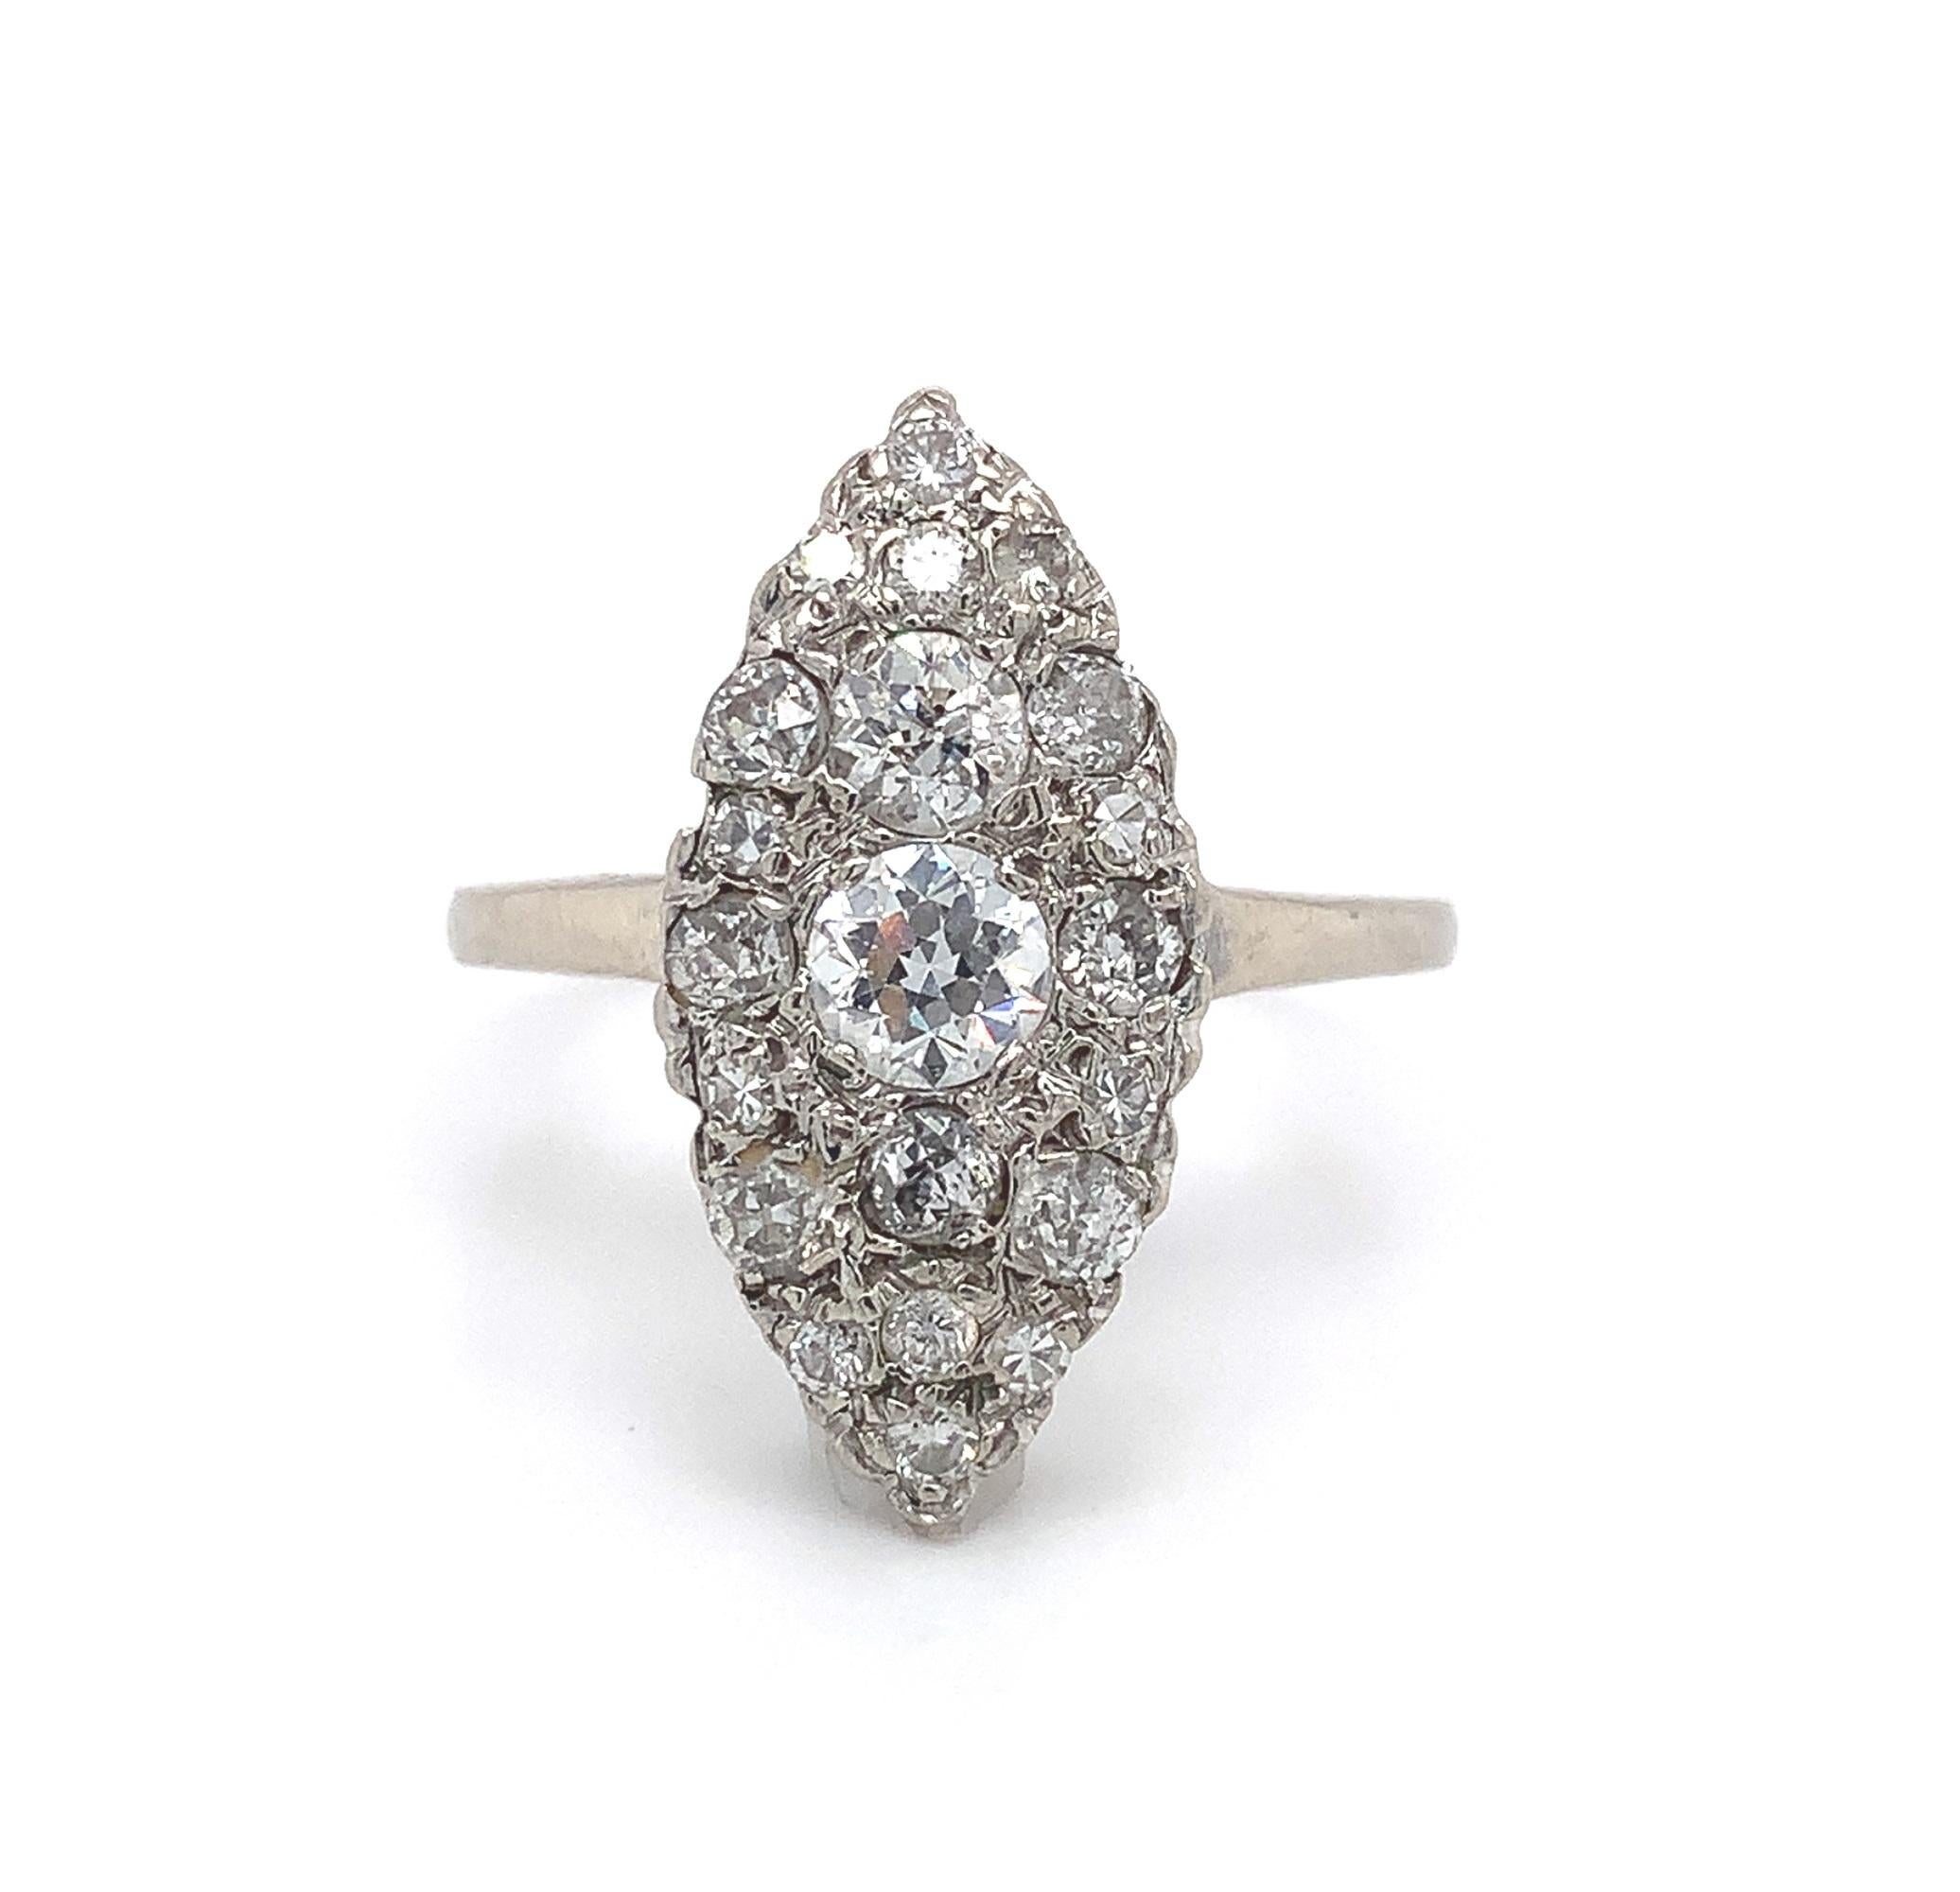 
14k white gold 1 carat tw diamond ring with vintage and antique diamonds set in a marquise shape. The center European cut diamond measures about 4.5mm.  There are 20 surrounding diamonds of various round cuts including mine, European, brilliant and